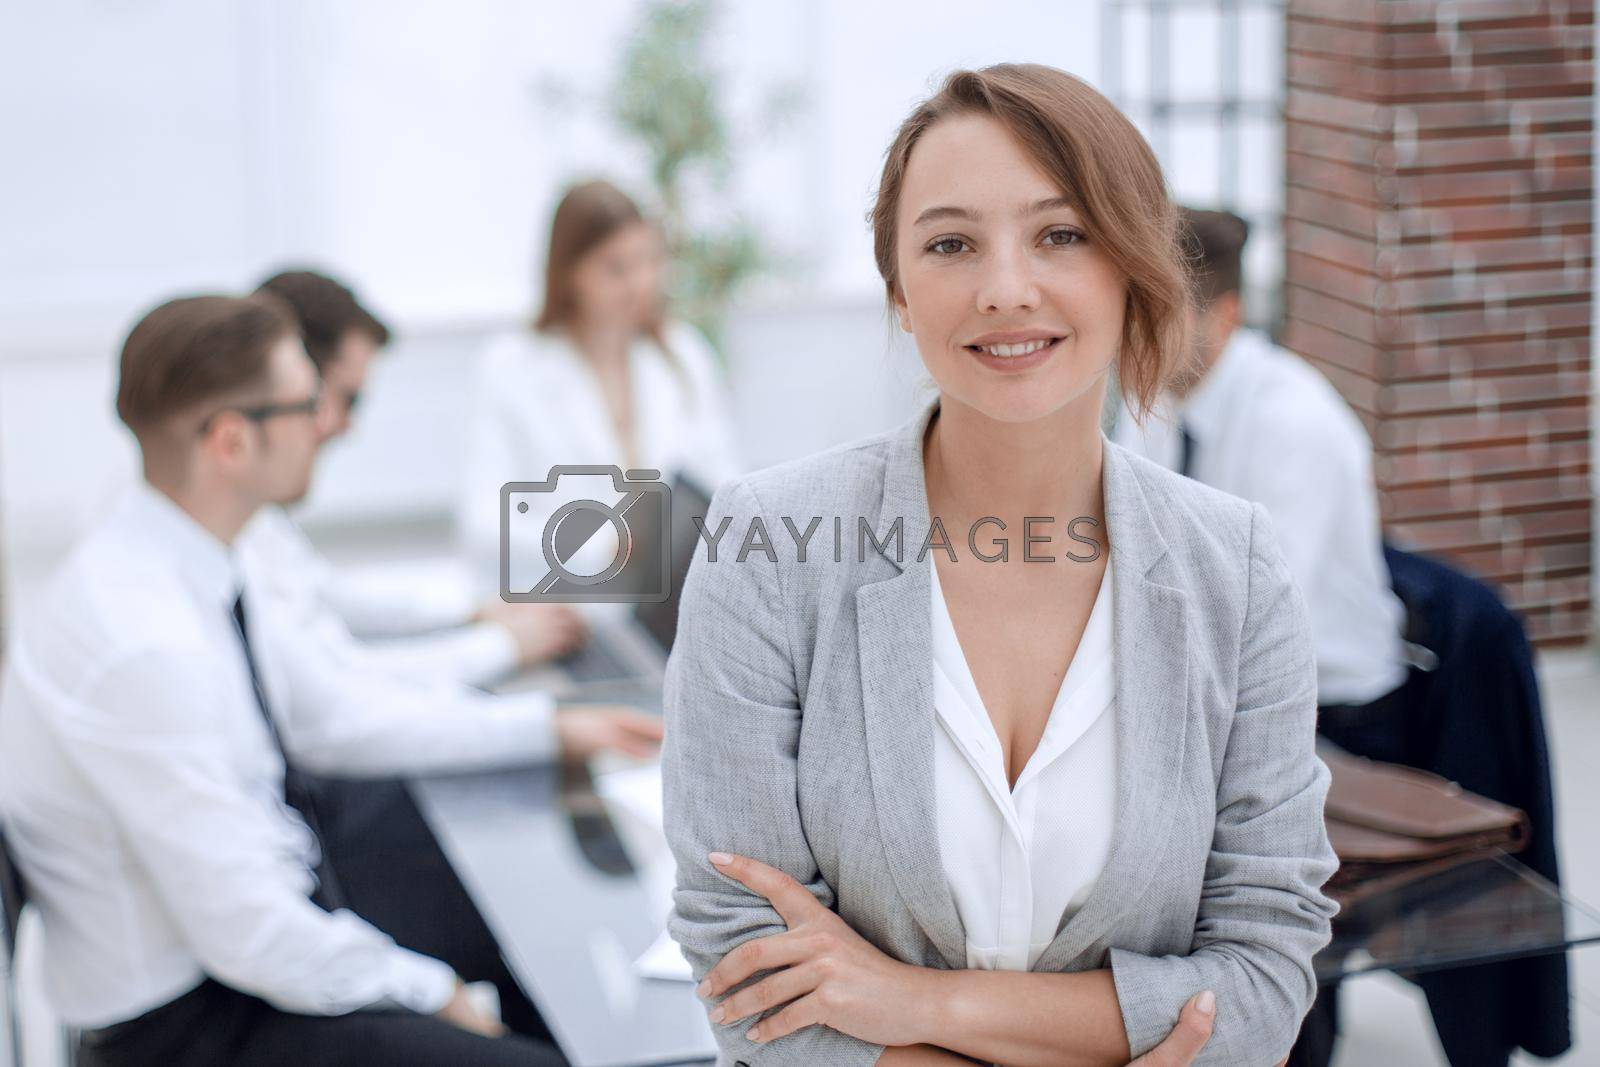 Royalty free image of portrait of young business woman on blurred office background by asdf